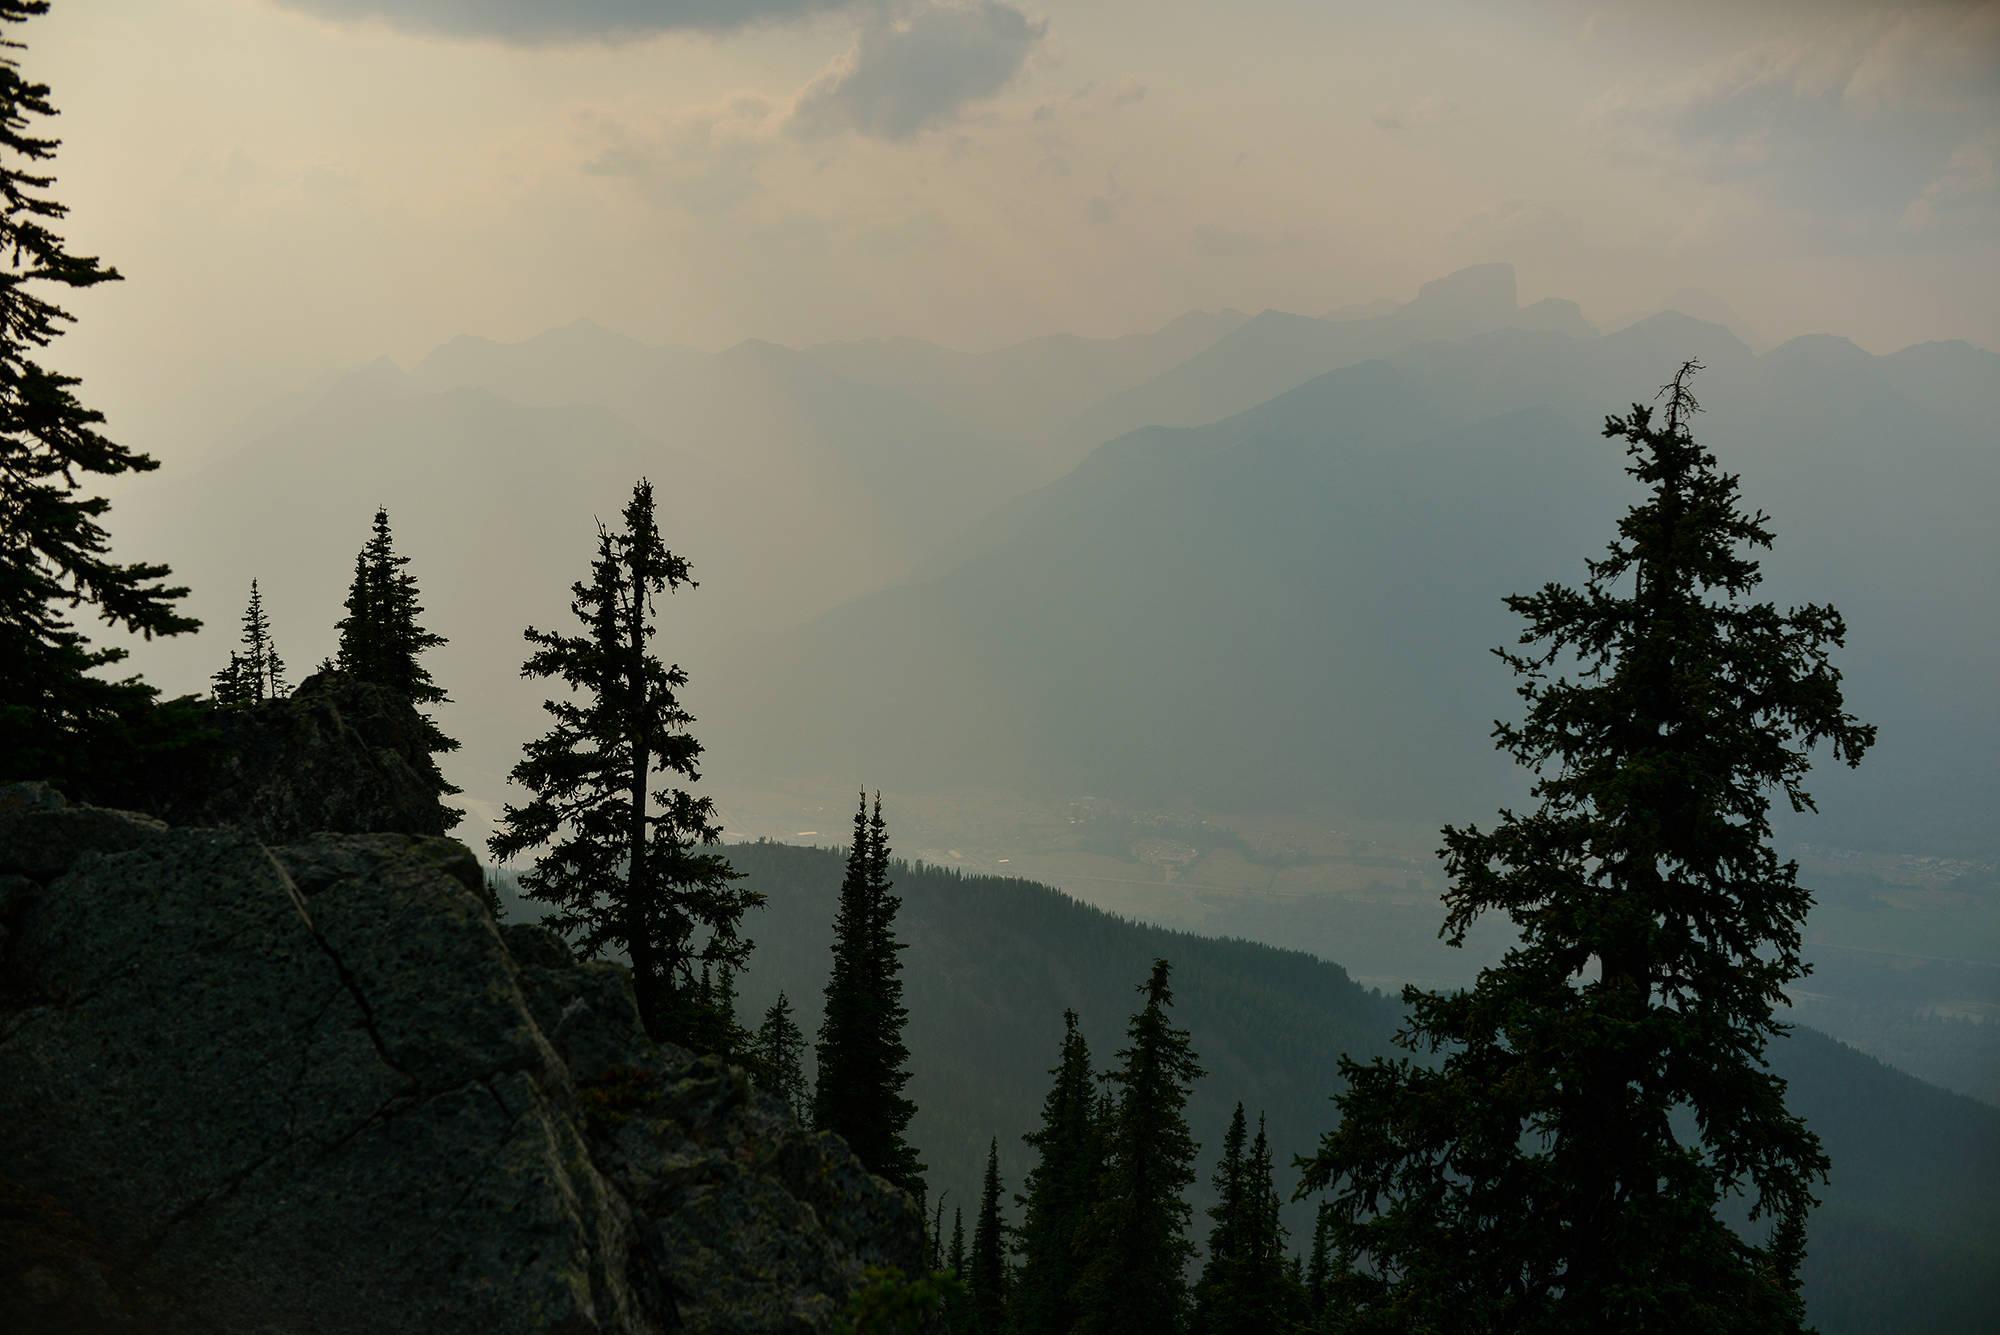 View from Three Sisters in Fernie, B.C.